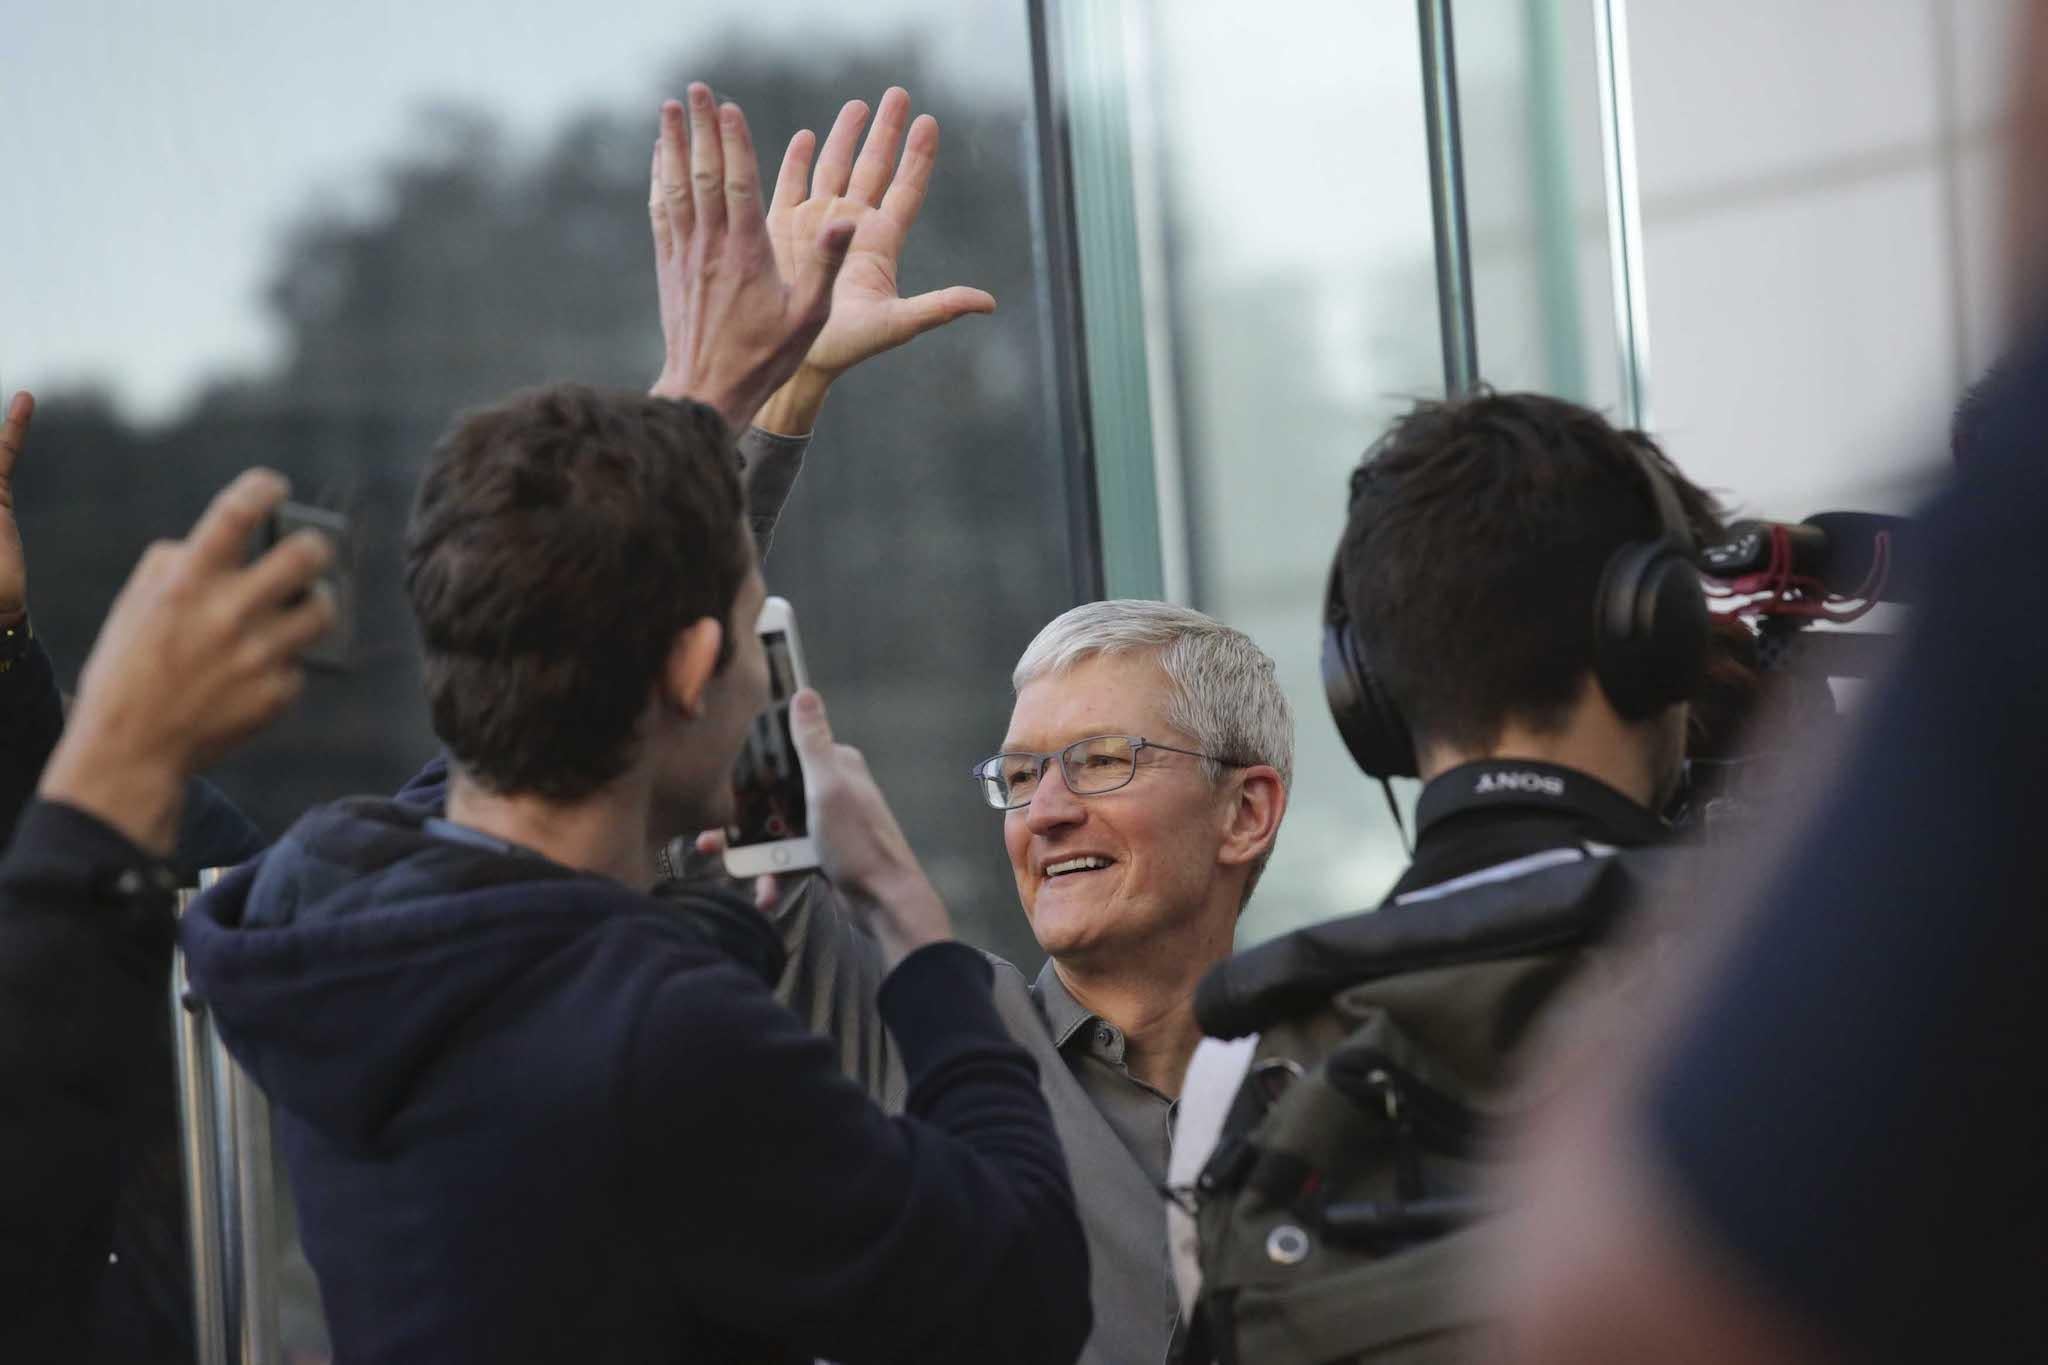 Apple CEO, Tim Cook openS the door of the newly renovated Apple Store at Fifth Avenue on September 20, 2019 in New York City